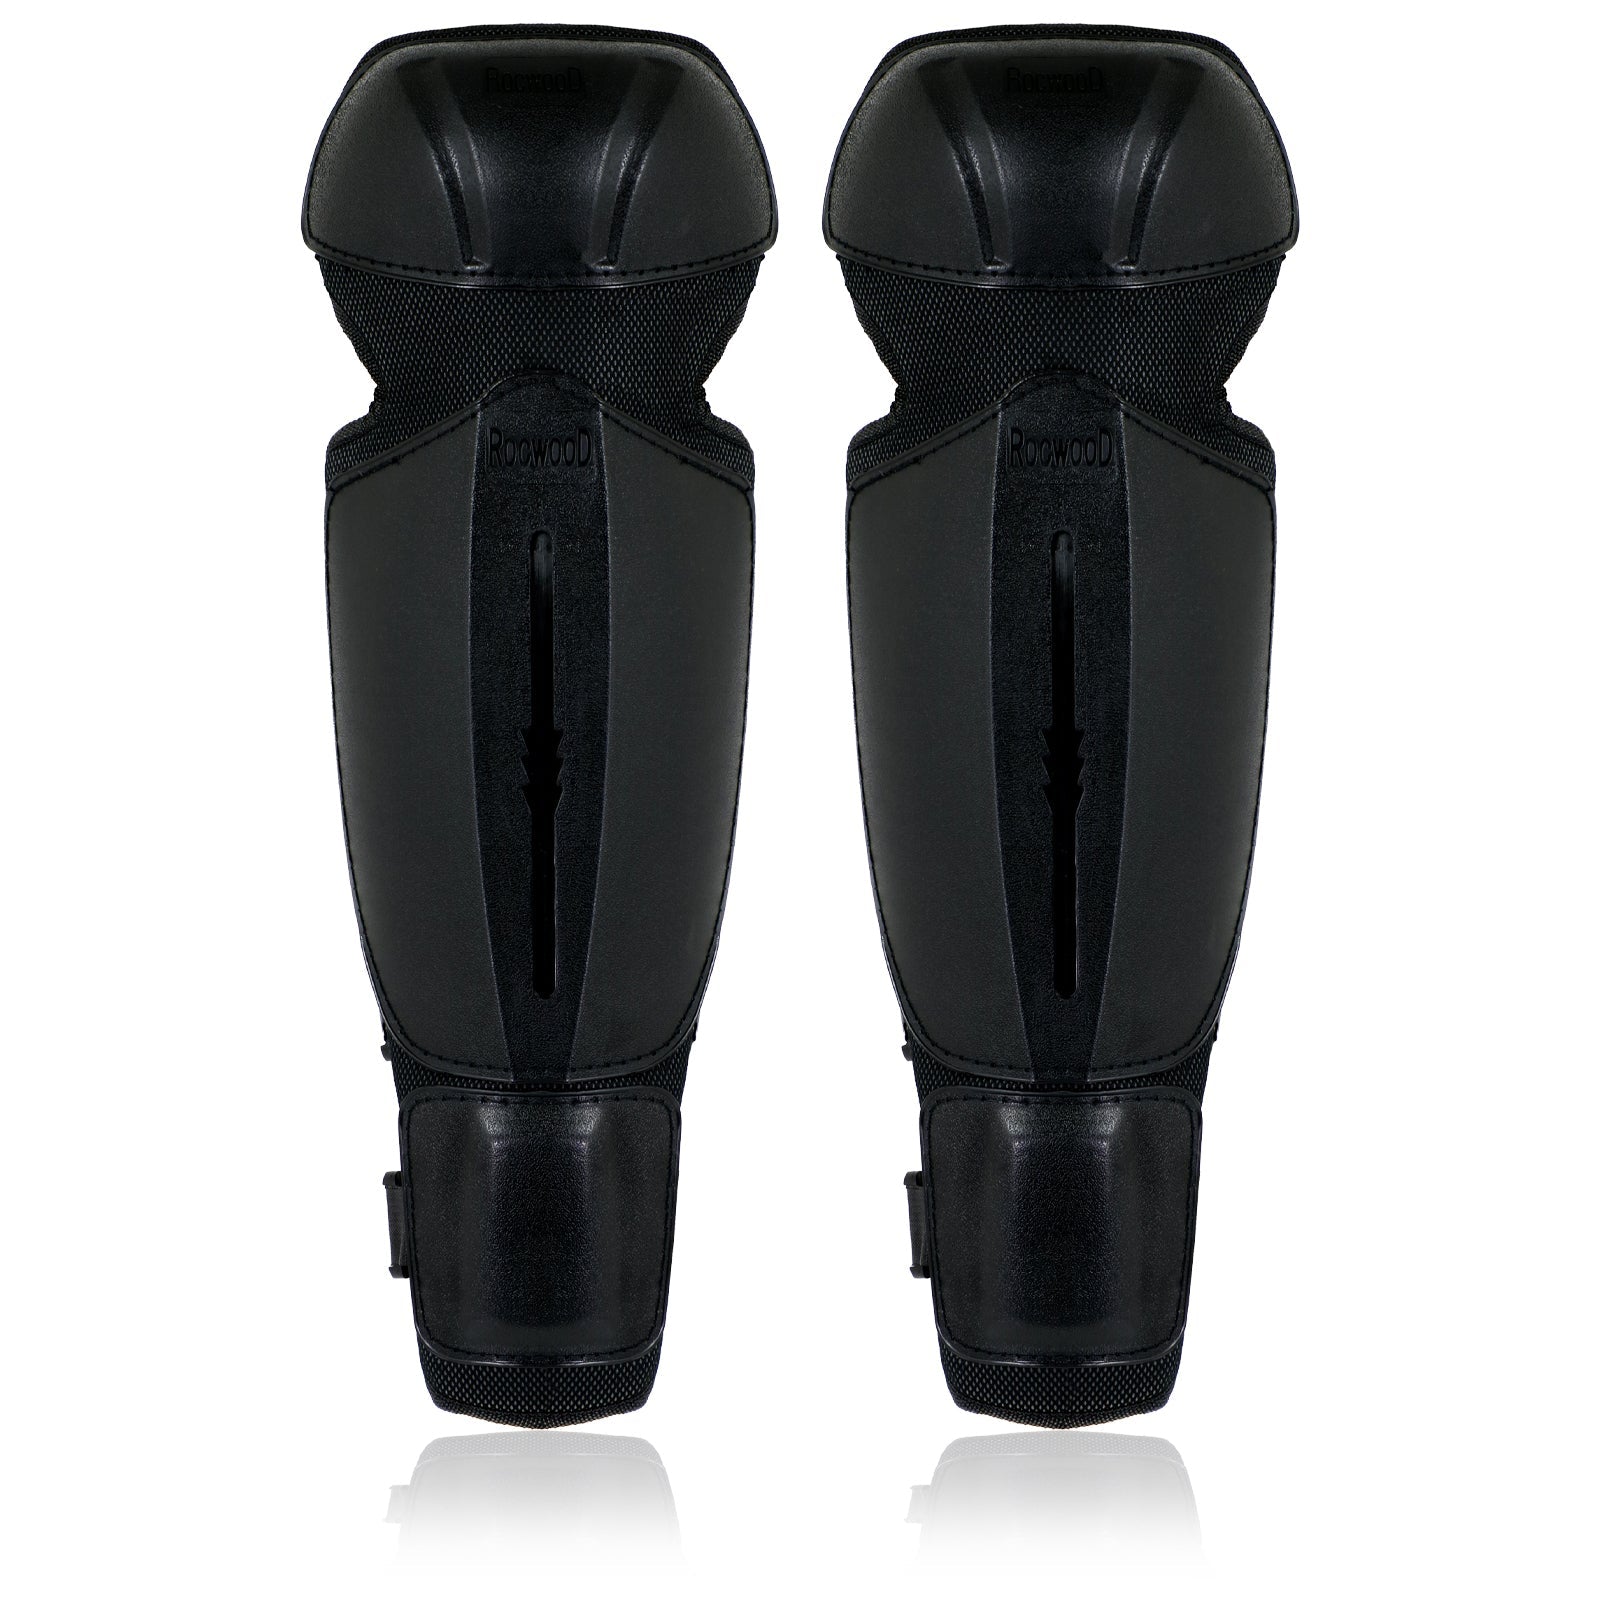 Knee & Shin Guards for Chainsaw (One Size, Black)